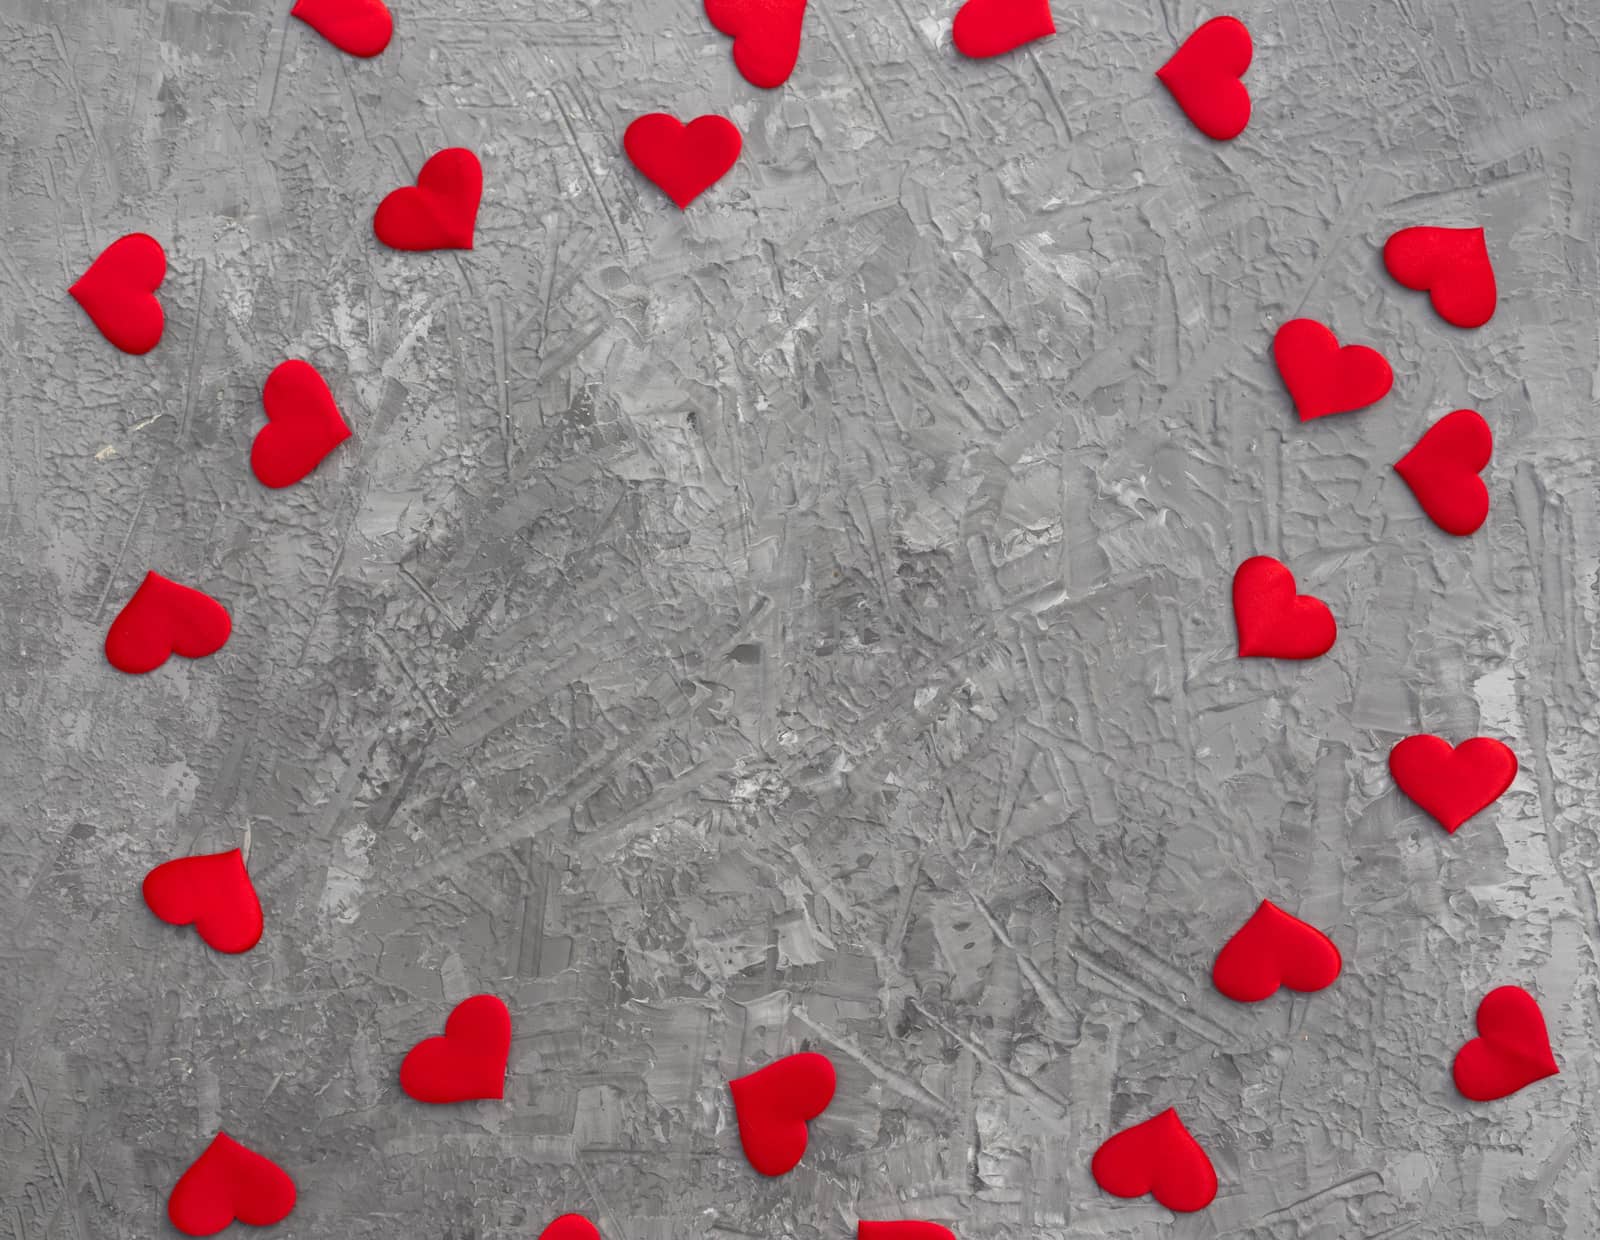 Romantic background with red hearts on concrete